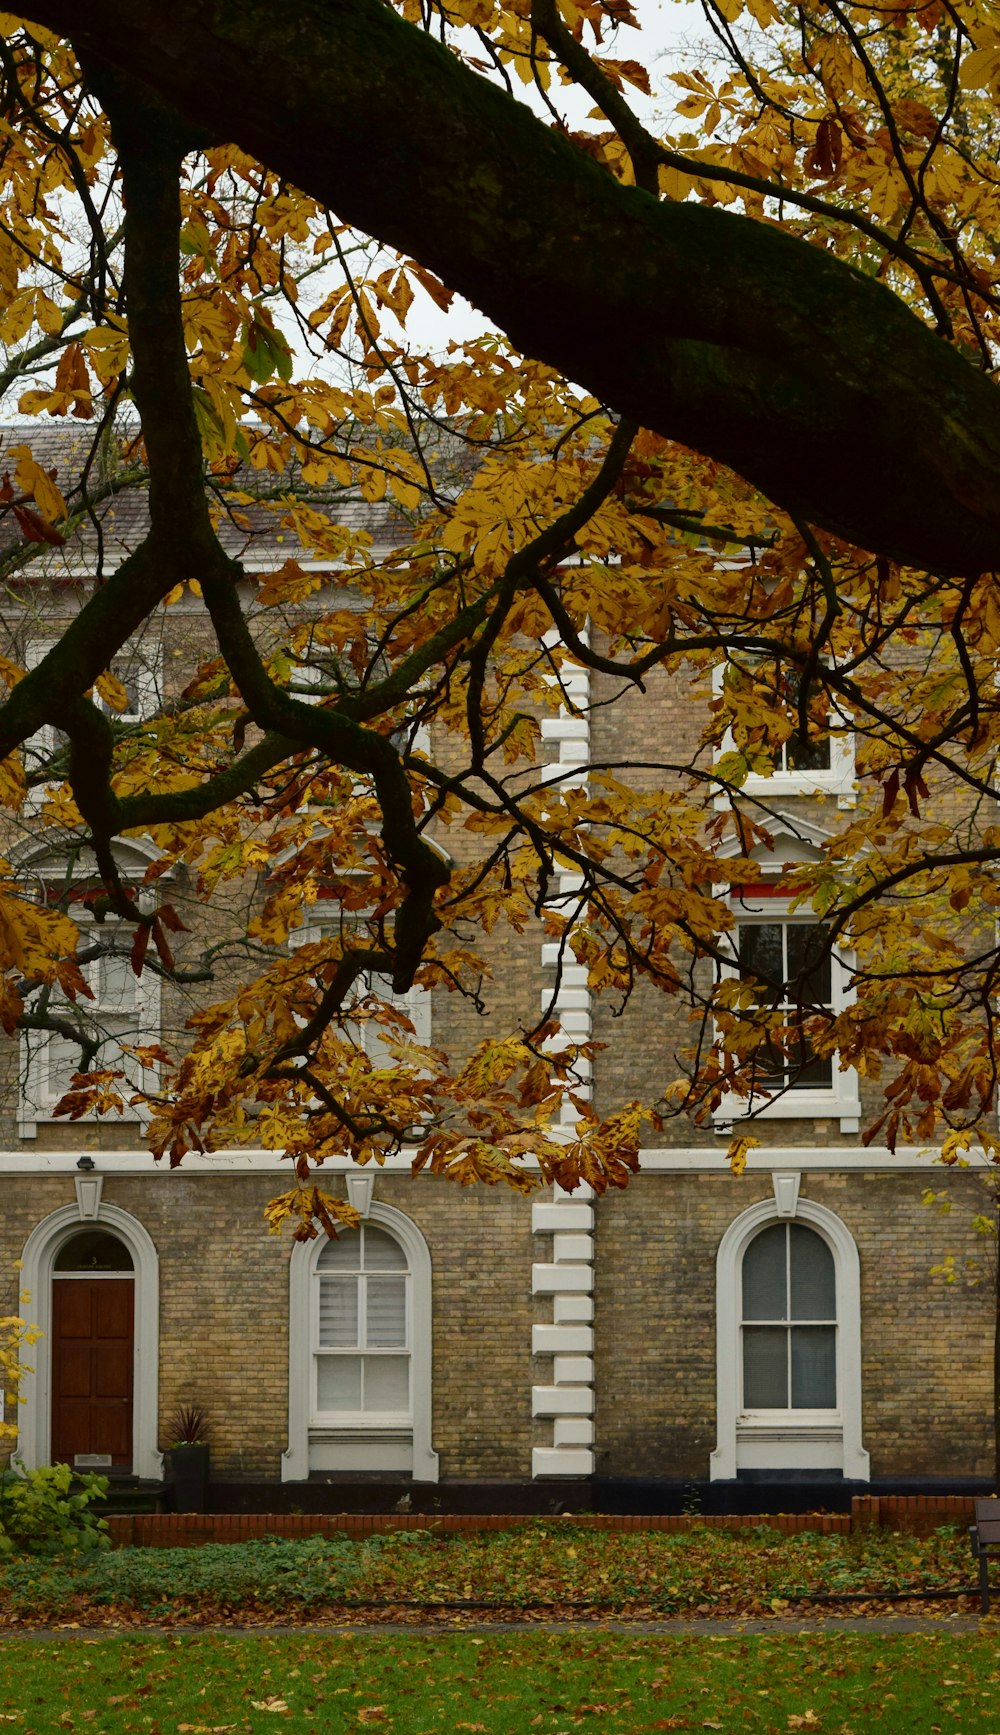 a tree with yellow leaves in front of a brick building